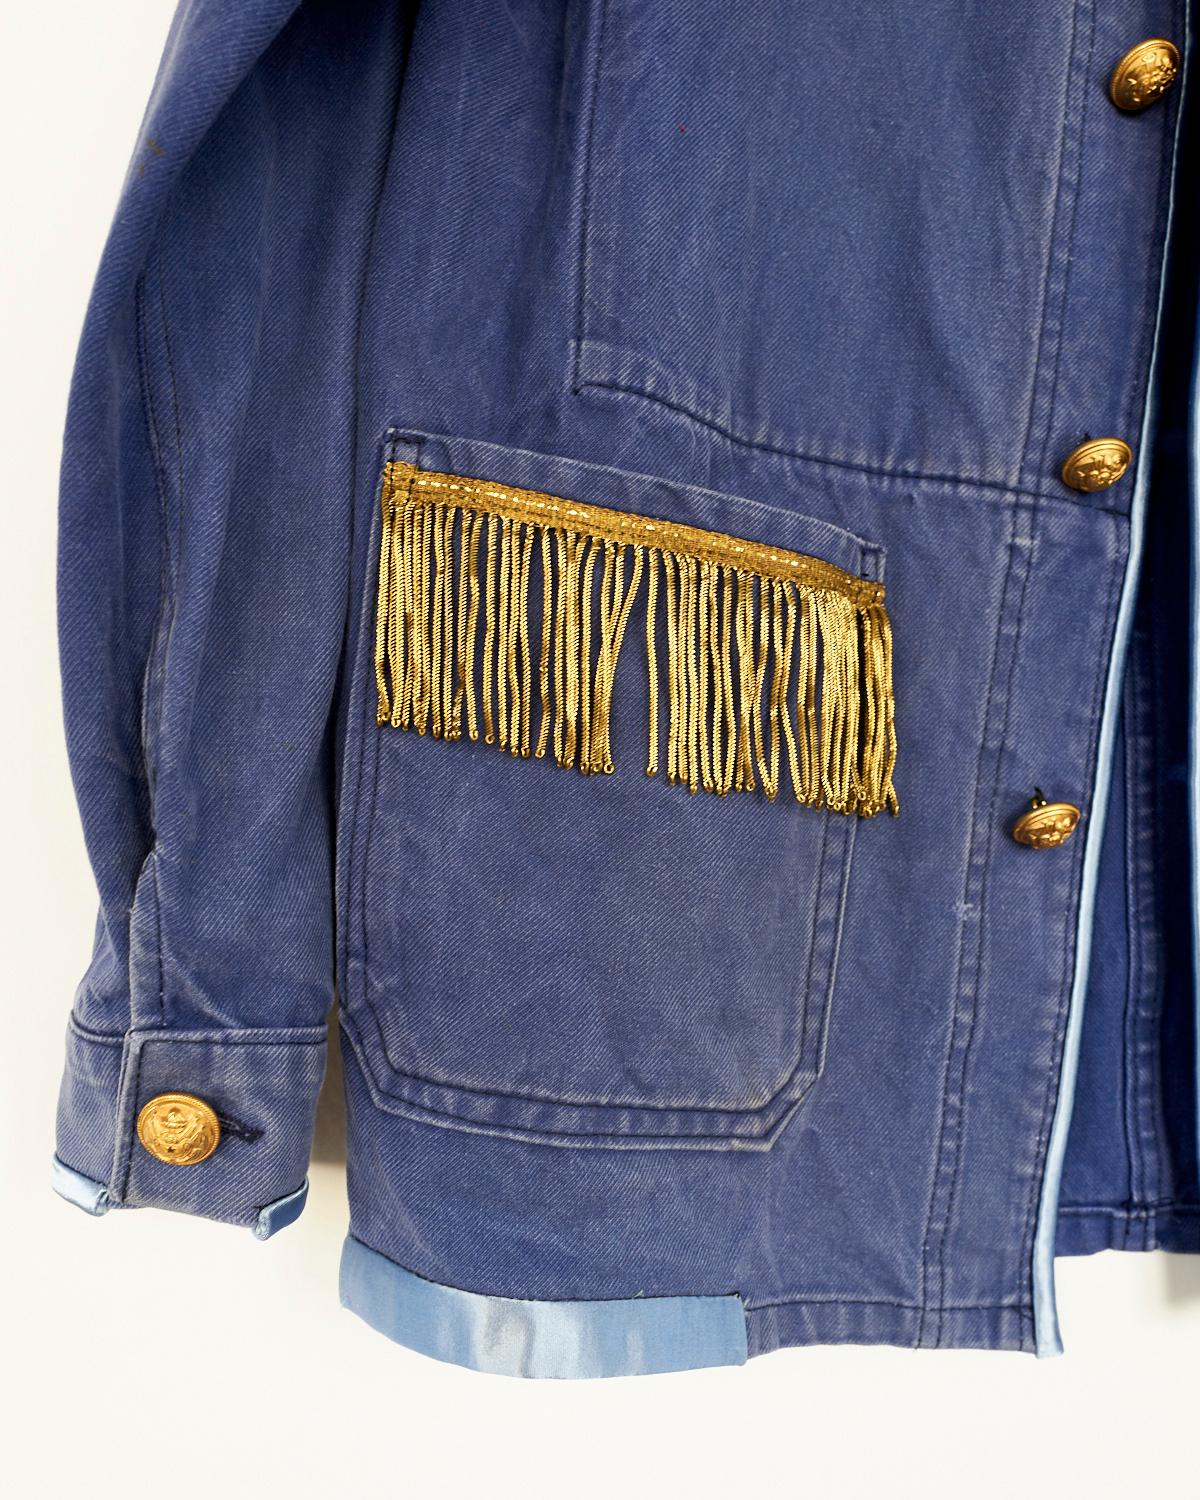 Jacket Blue Gold Fringes Oversize Vintage Distressed French Blue 
Brand: J Dauphin
Size: Medium
Will fit a bit oversize on a small and regular on a medium.
Sustainable Luxury, Collectible Vintage Upcycled Re-purposed

Our one of a kind, zero waste,